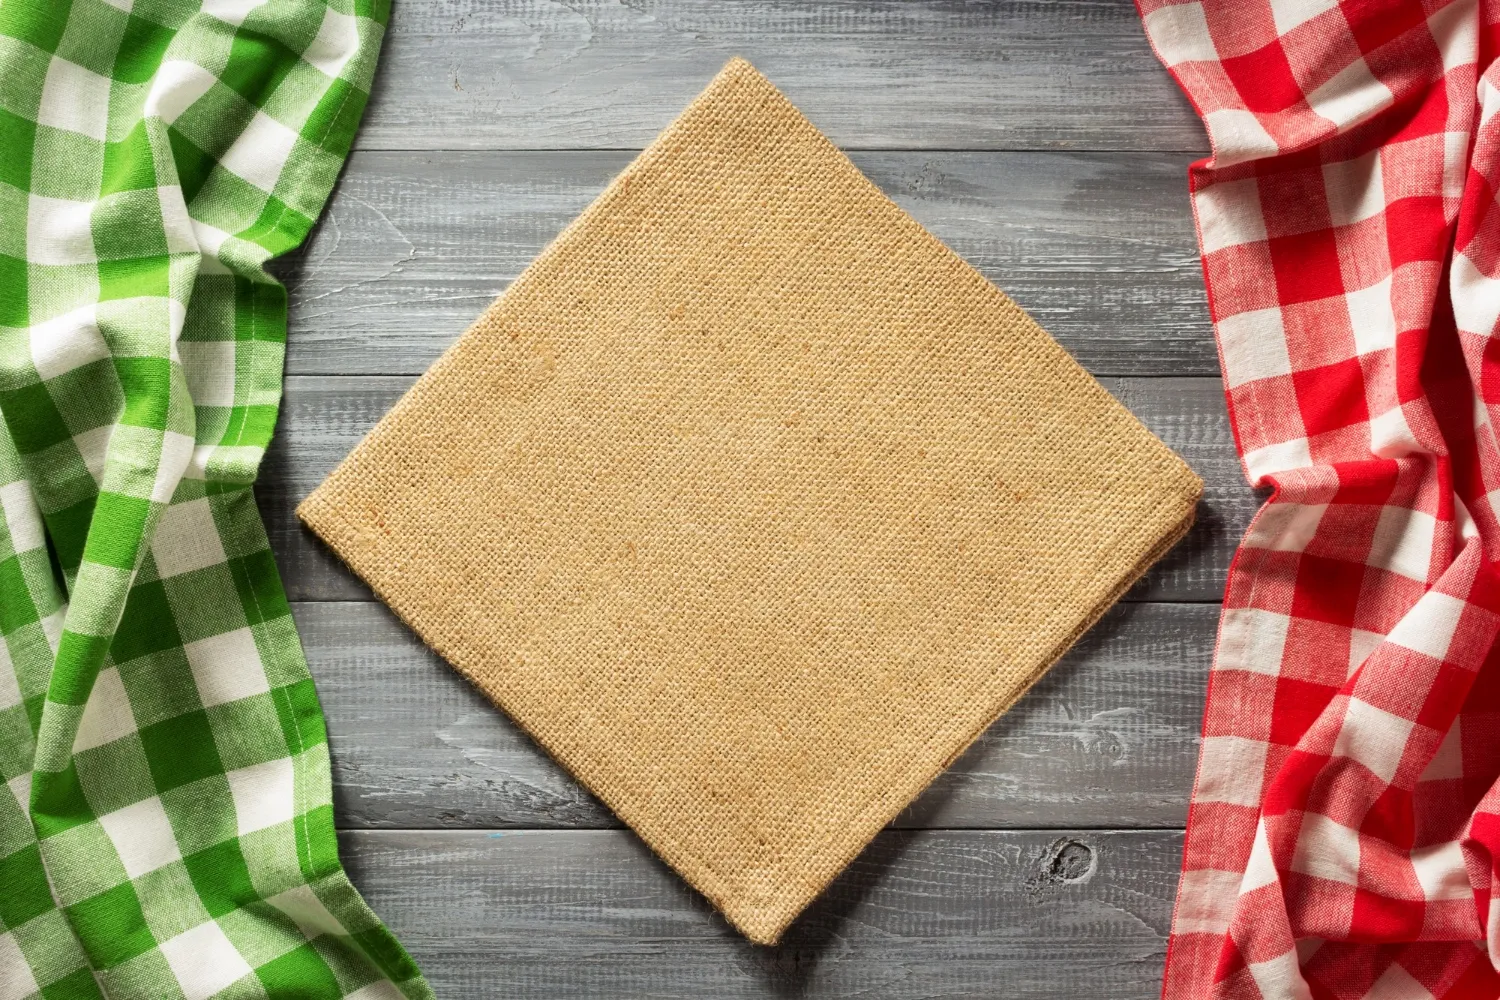 Cloth checked napkin on wooden